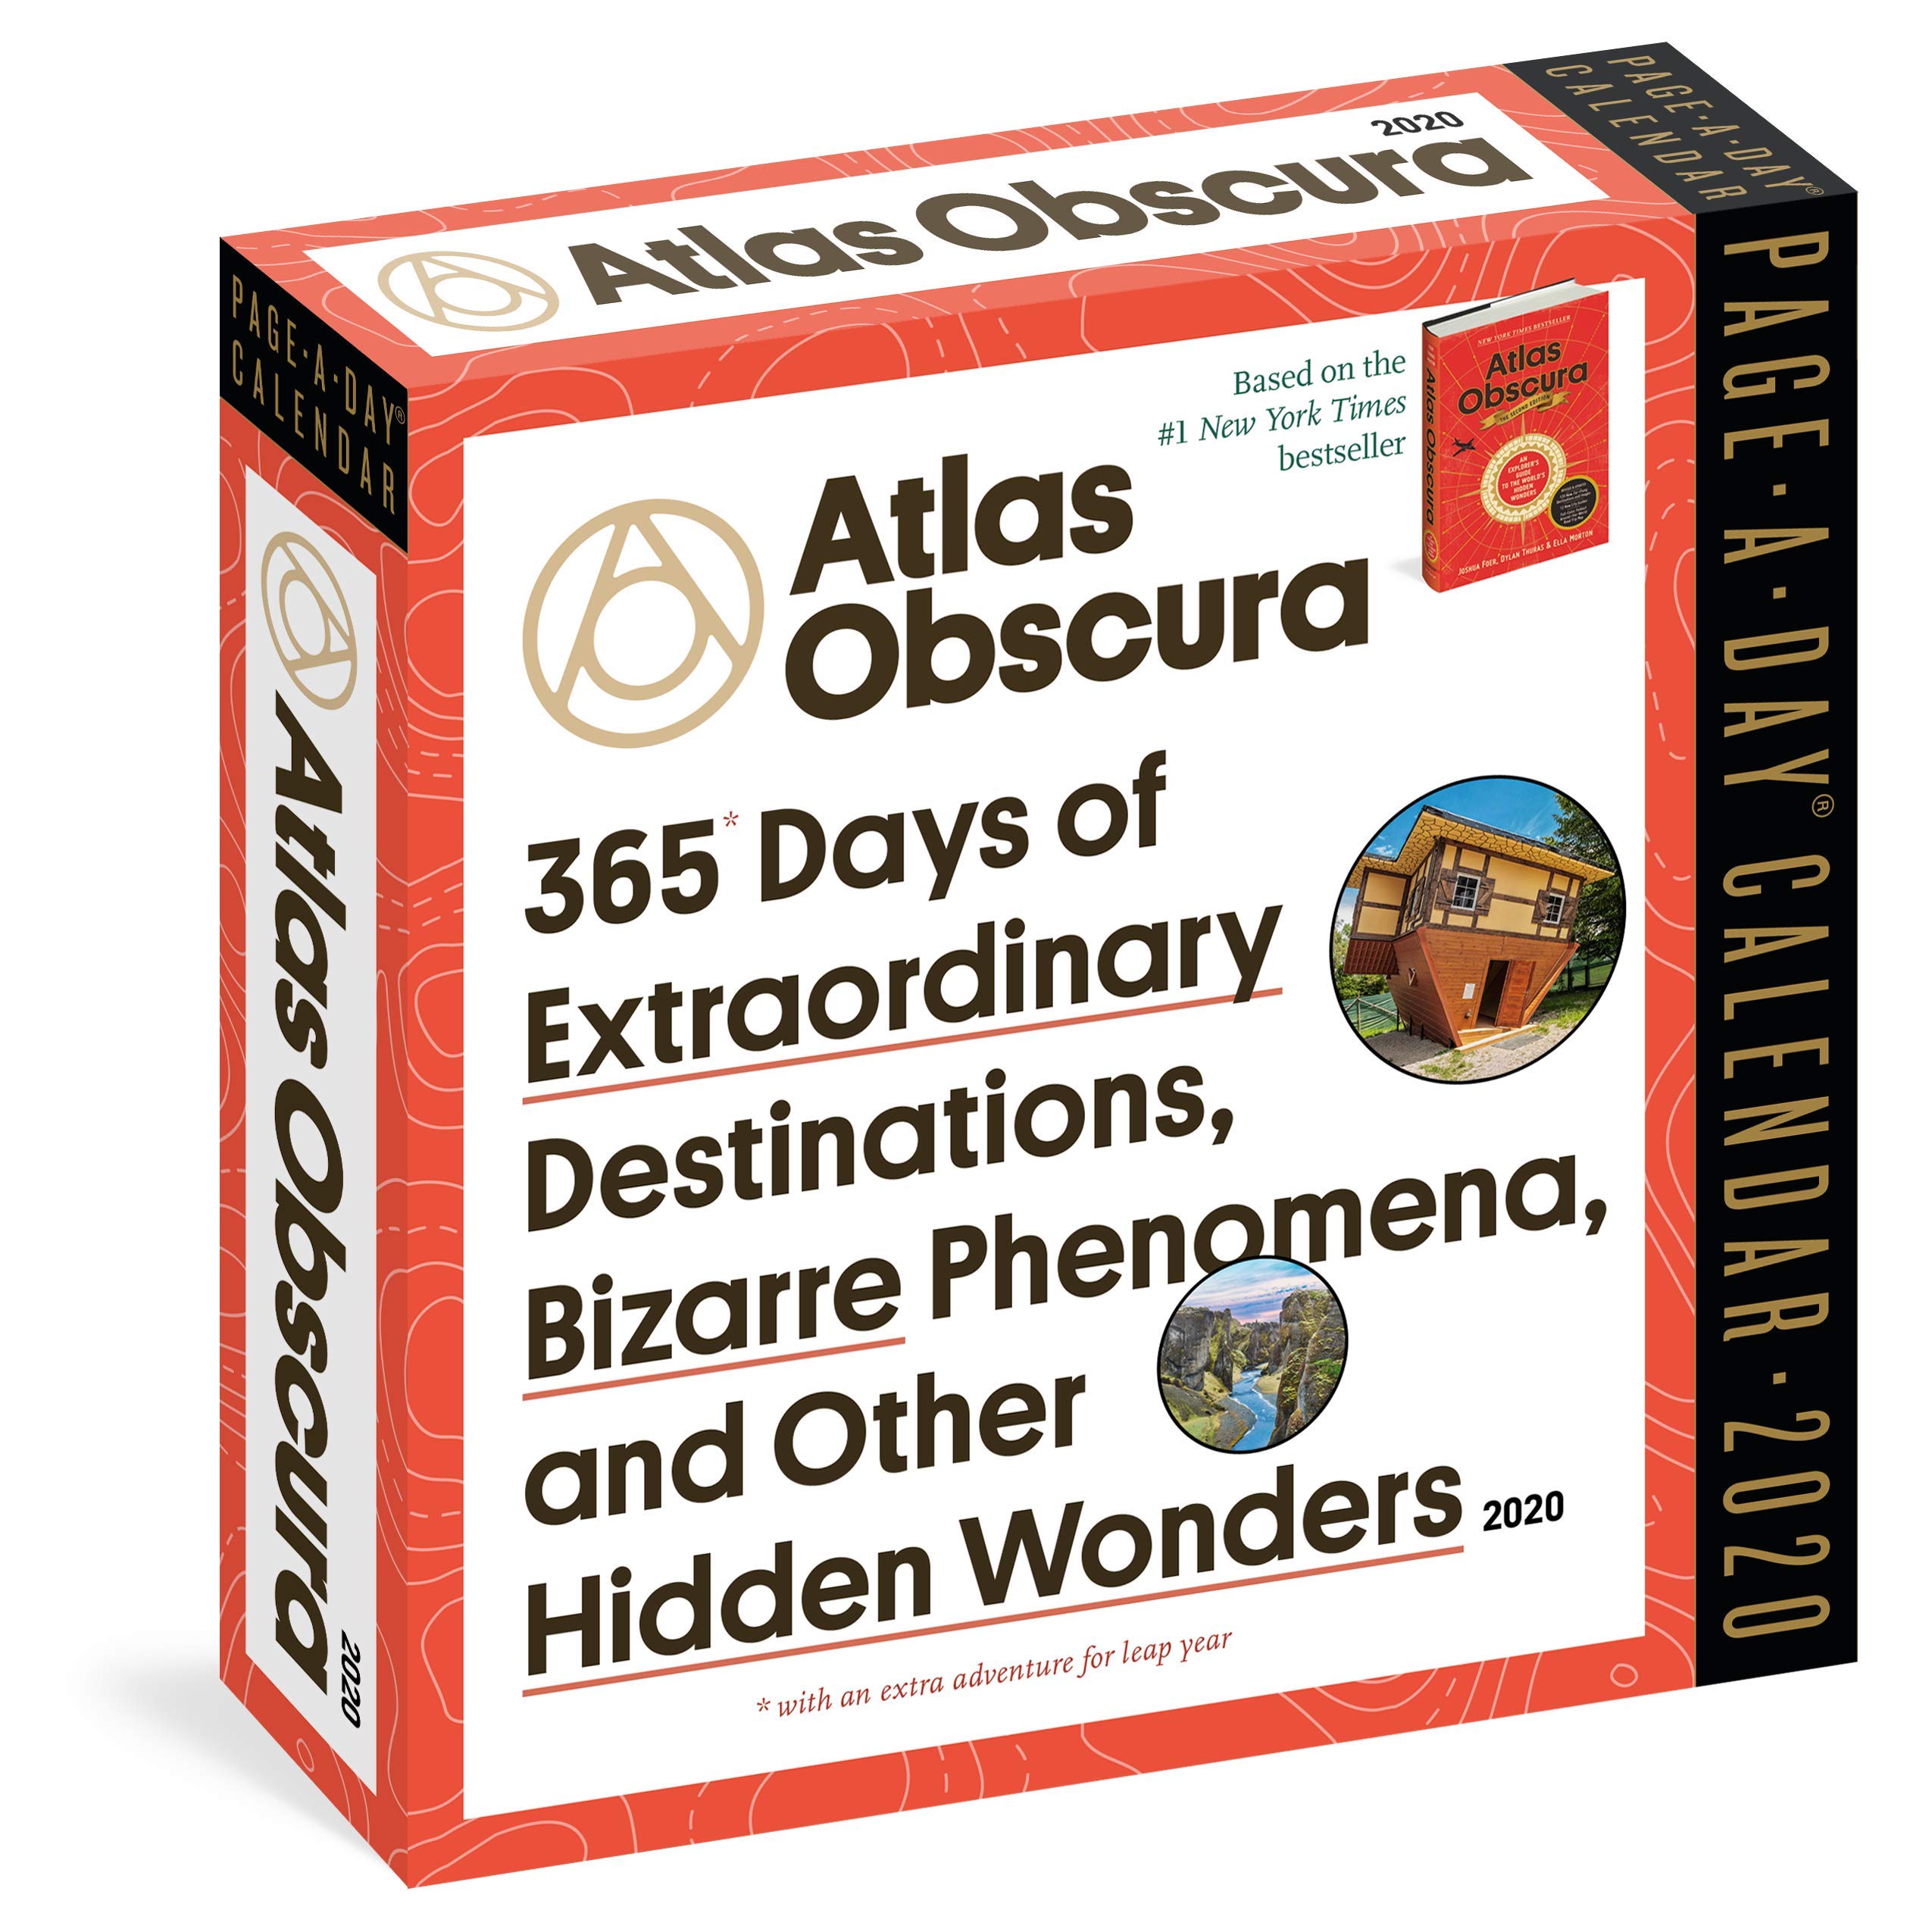 Calendar 2020 - Page-A-Day - Atlas Obscura | Workman Publishing